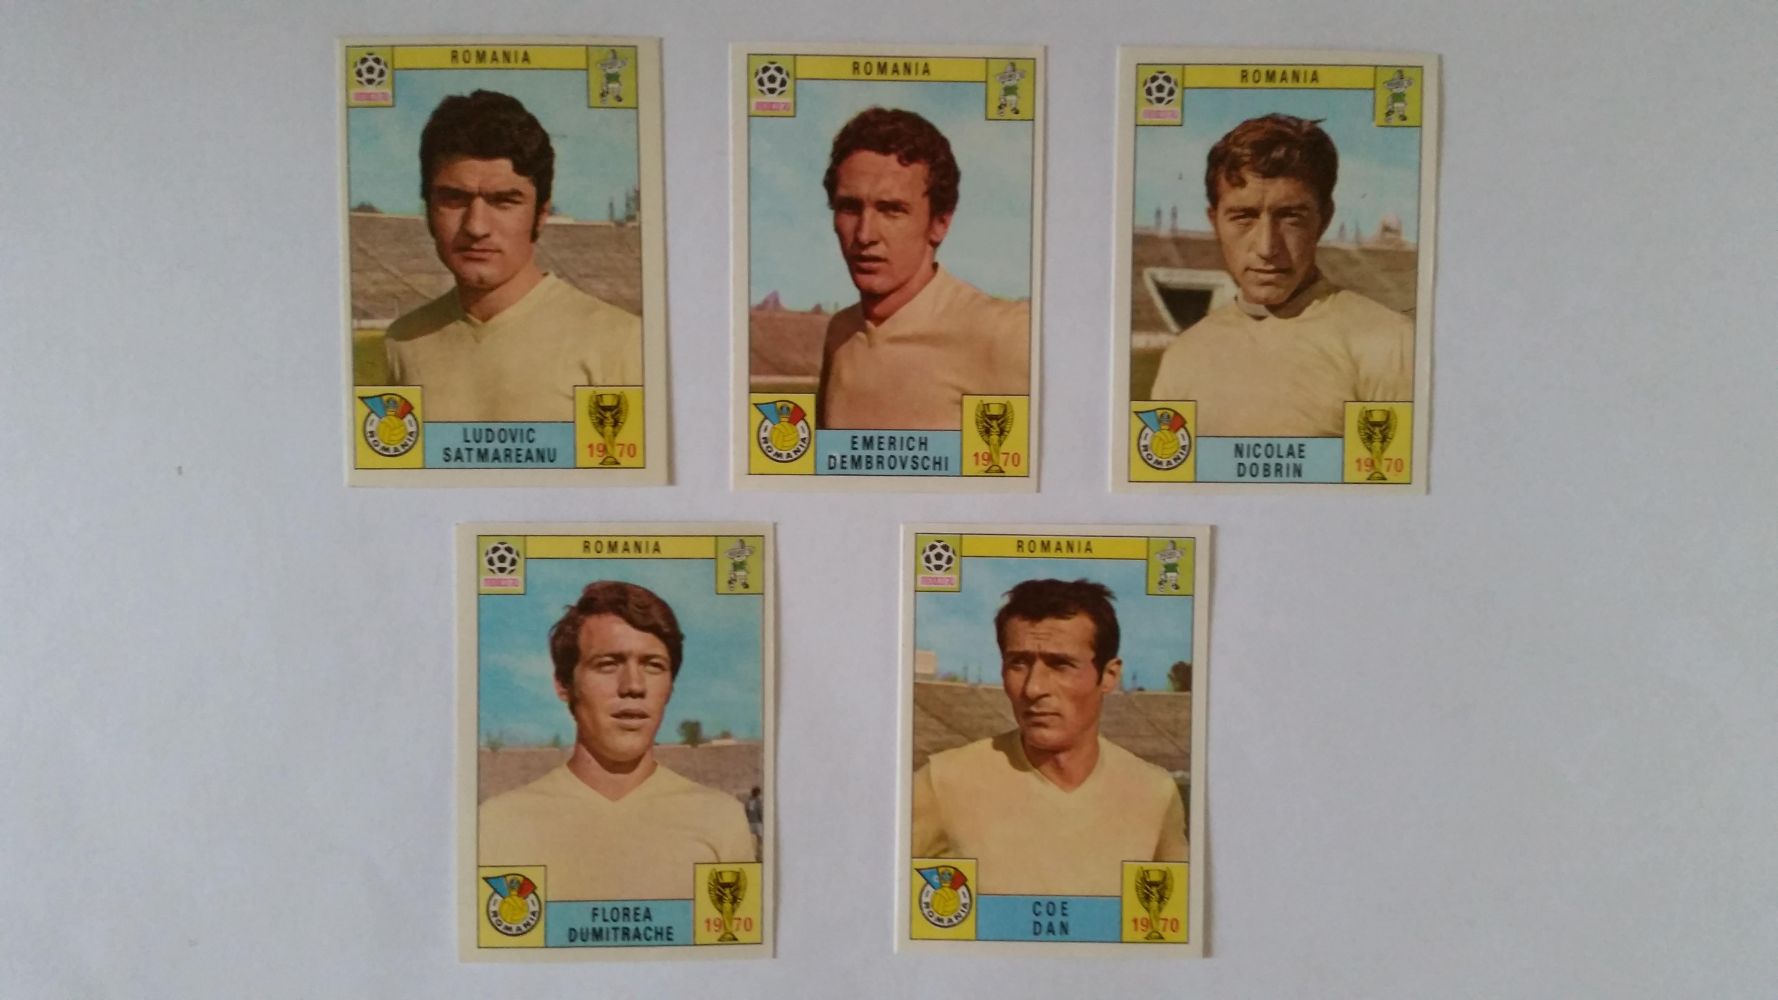 TRADE CARDS - PANINI MEXICO 70 FOOTBALL WORLD CUP SINGLES AND SMALL GROUPS